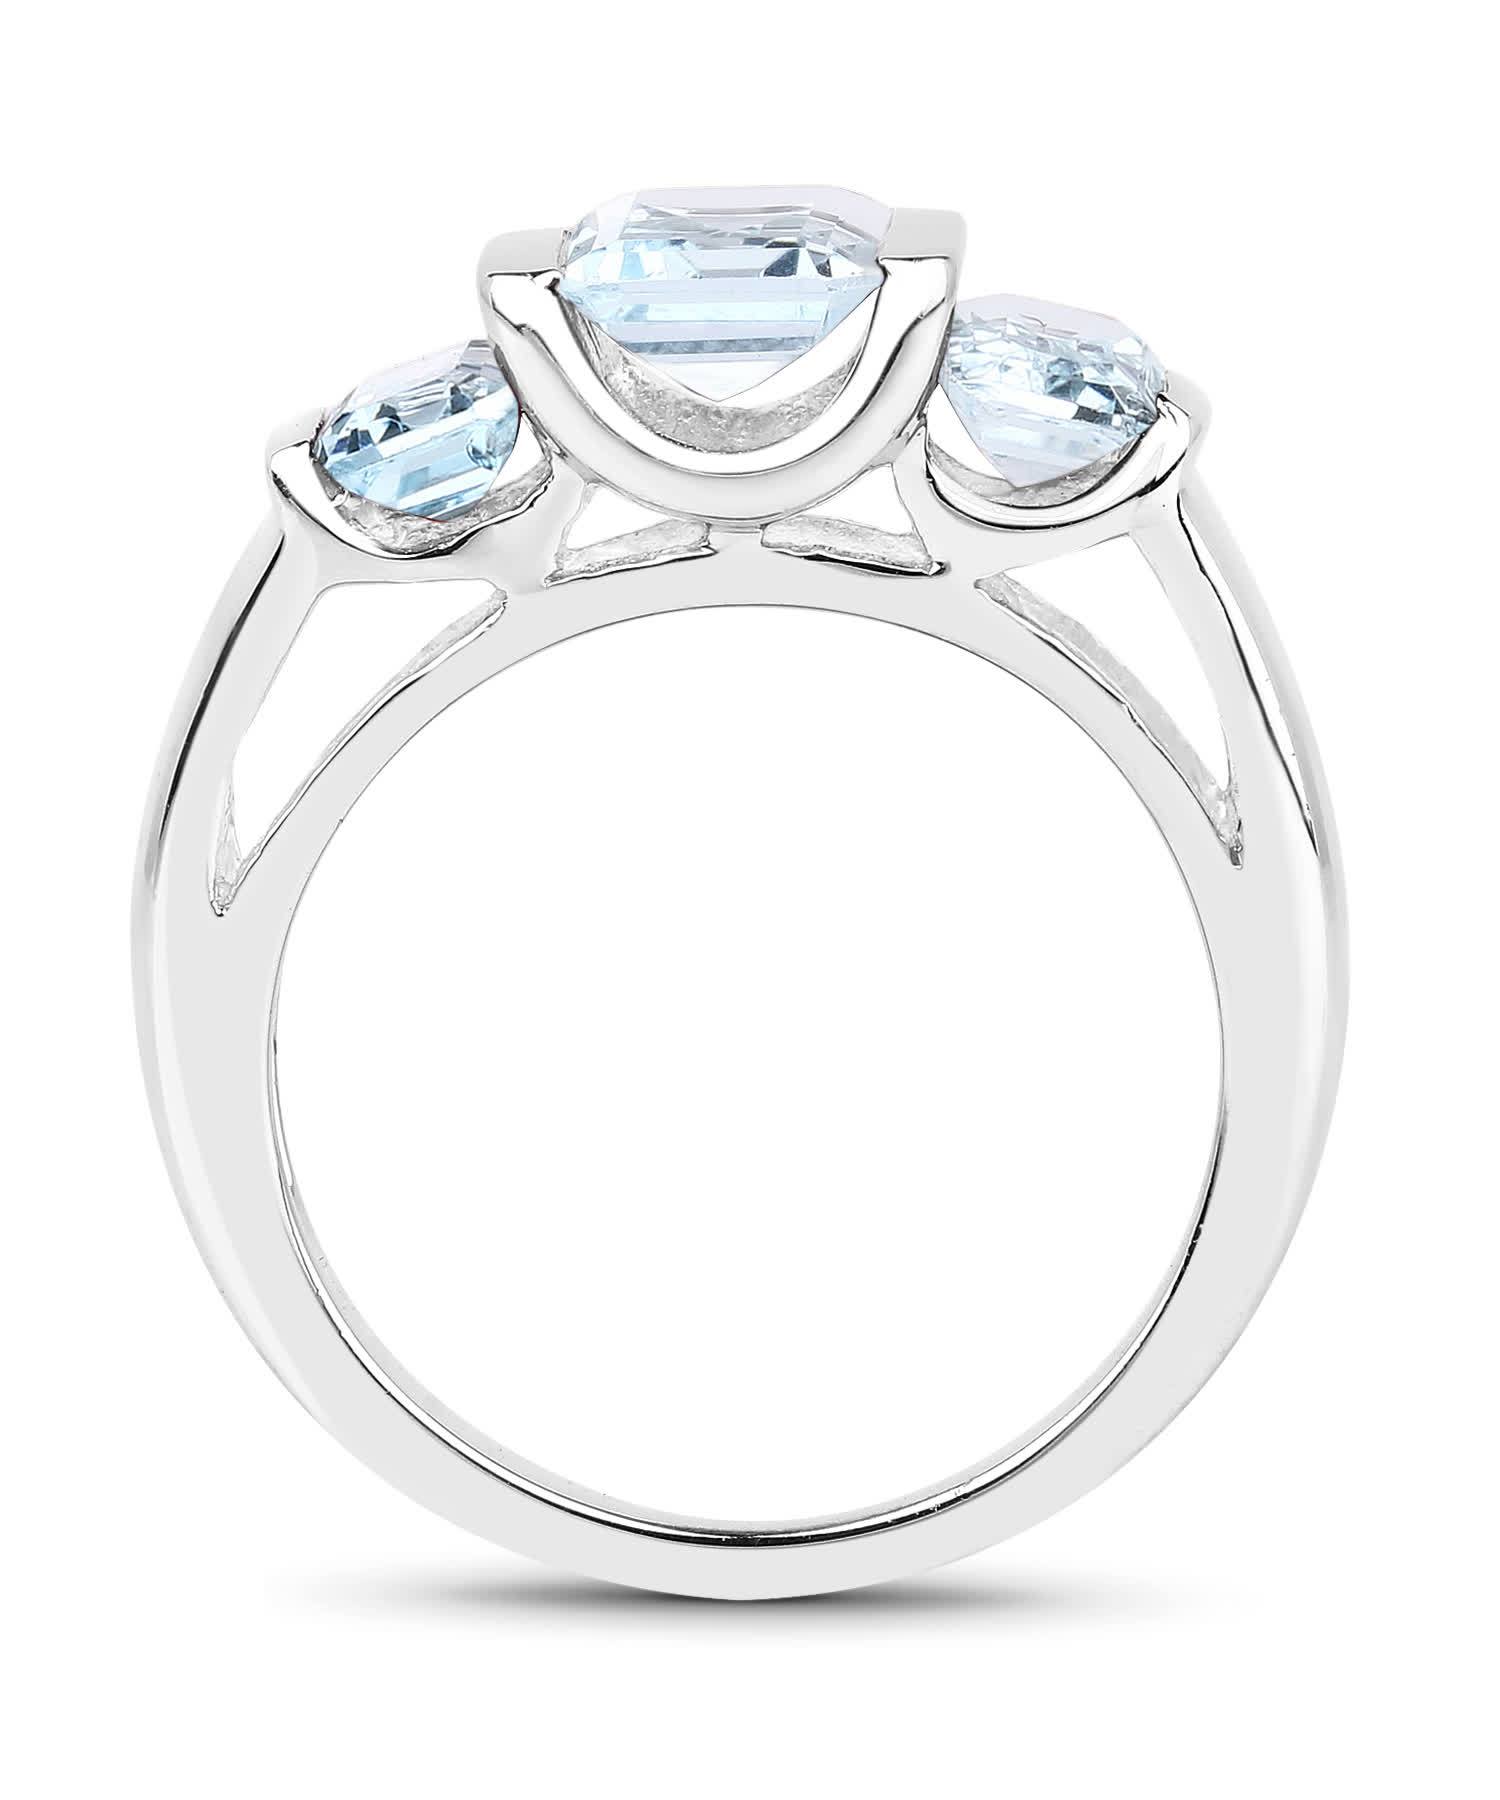 3.21ctw Natural Sky Blue Topaz Rhodium Plated 925 Sterling Silver Three-Stone Right Hand Ring View 2